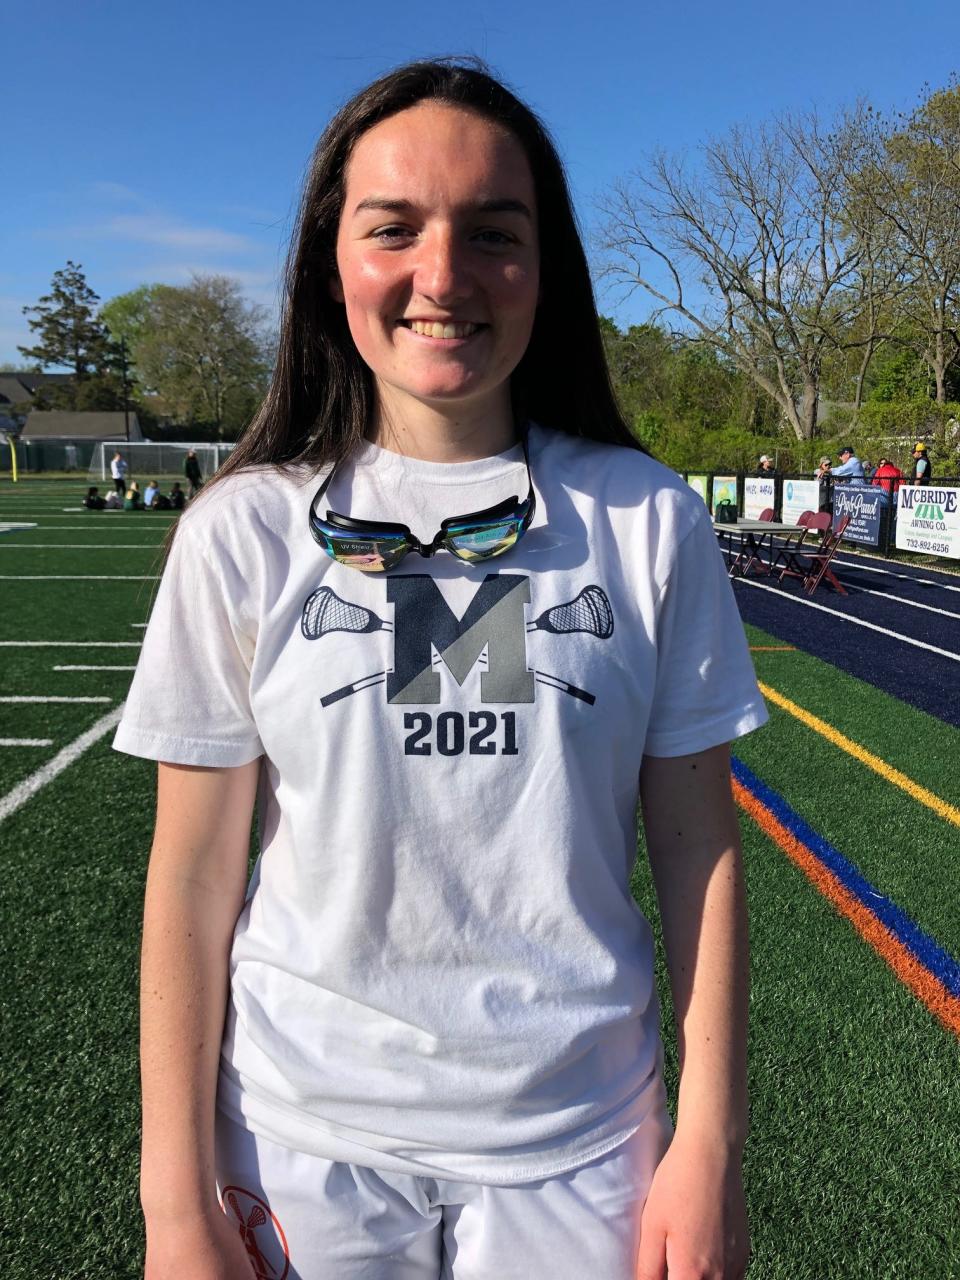 Manasquan senior Quinn McCarthy of the girls lacrosse team spoke to the Asbury Park Press following her team's 14-8 win over Red Bank Catholic on May 11, 2022.